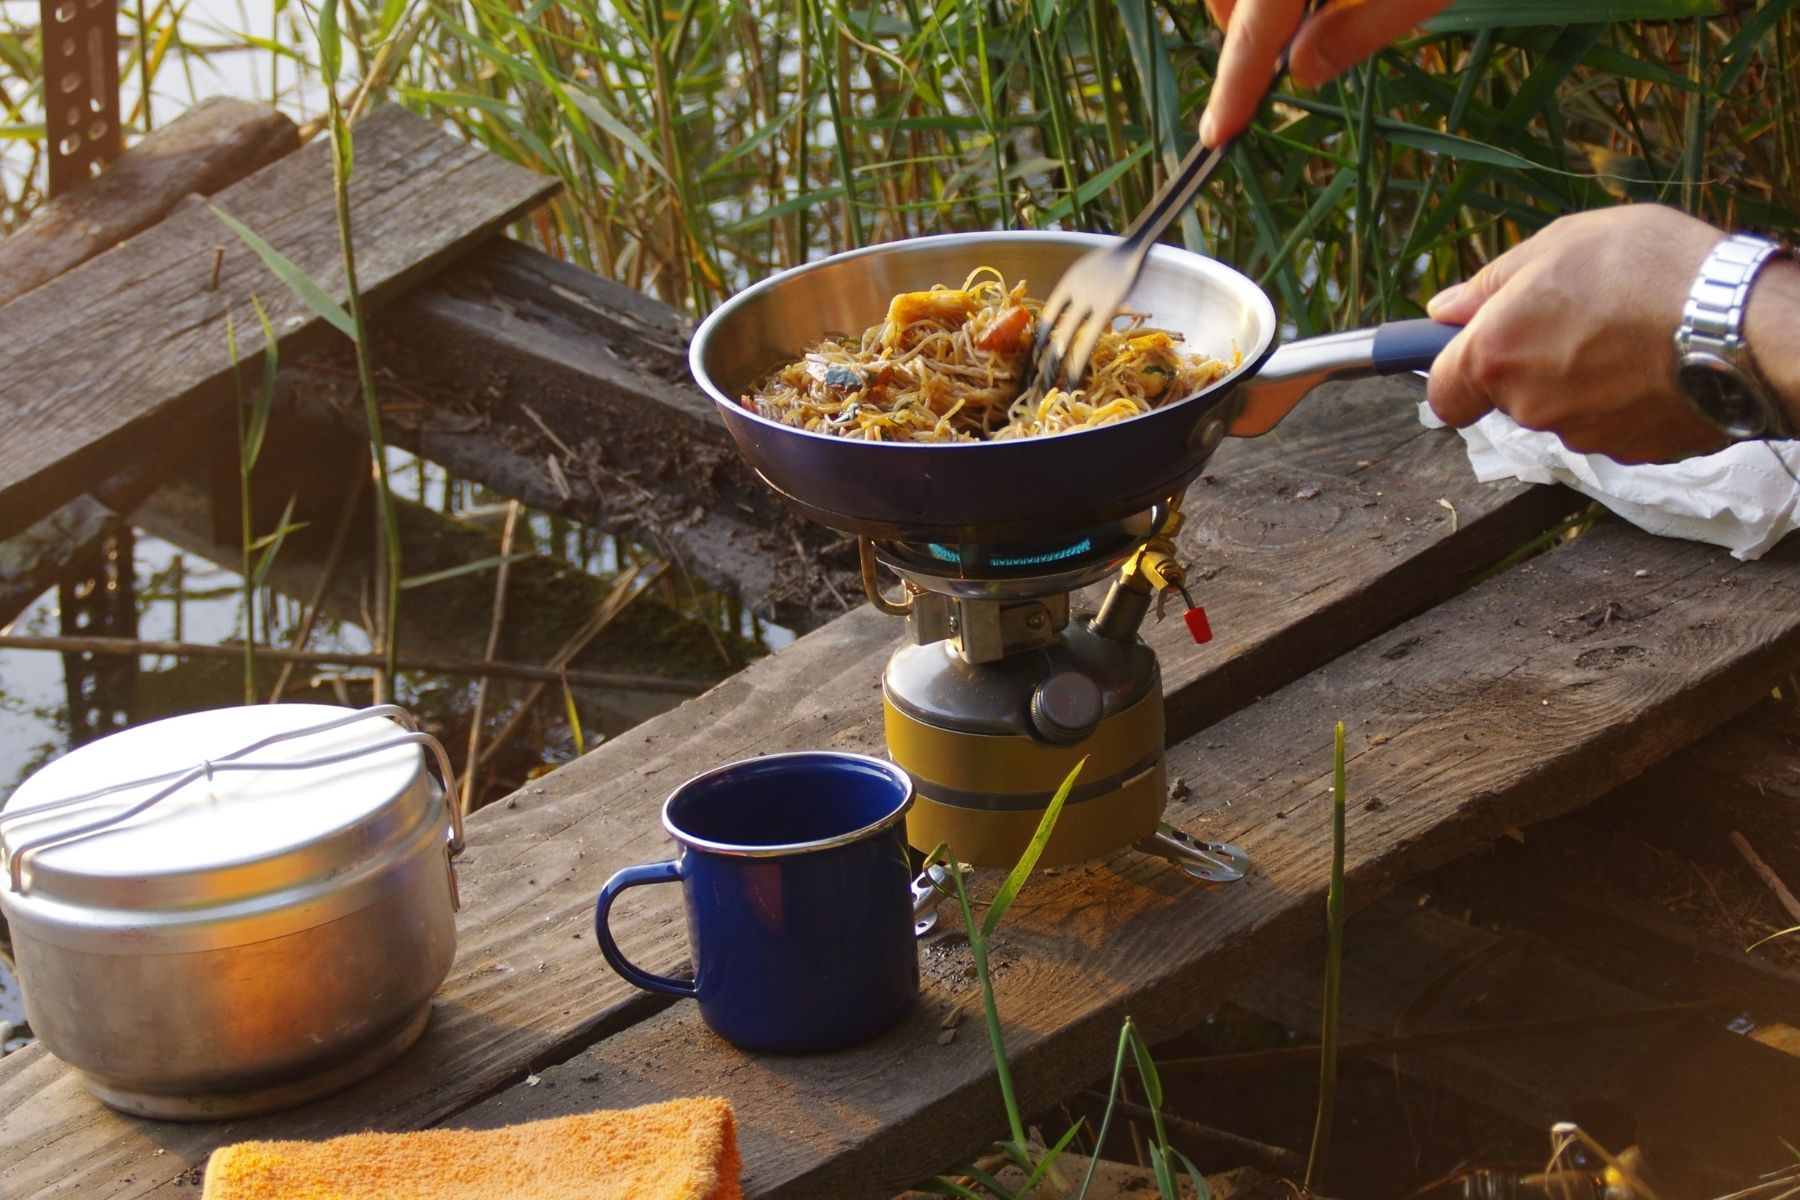 How Do I Choose the Best Camping Cookware?